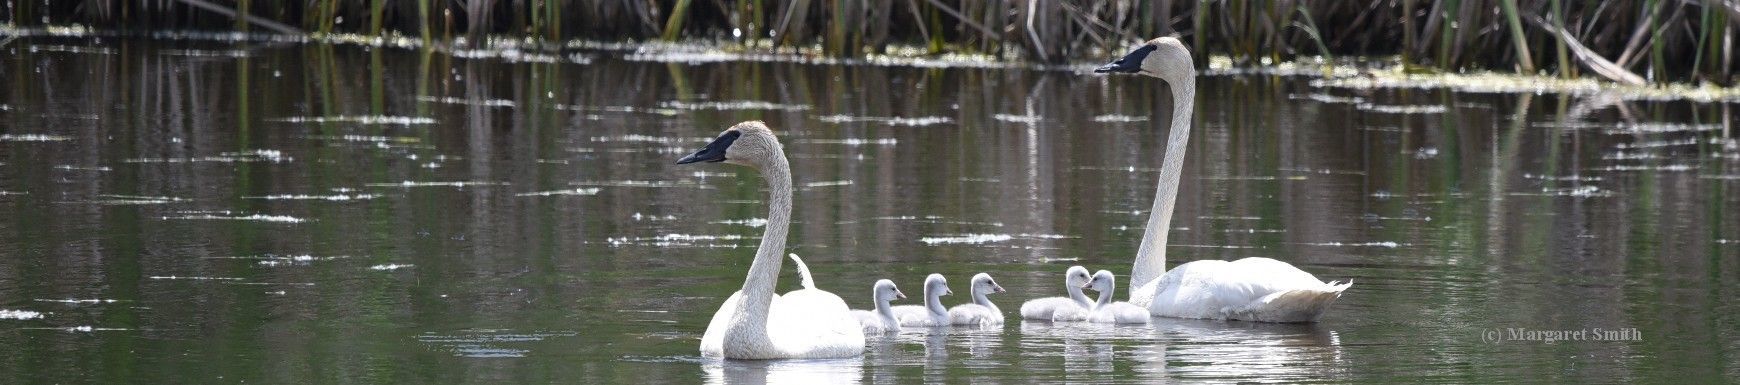 Gifts in your will to TTSS will make sure future generations will know and see the beauty of Trumpeter Swans